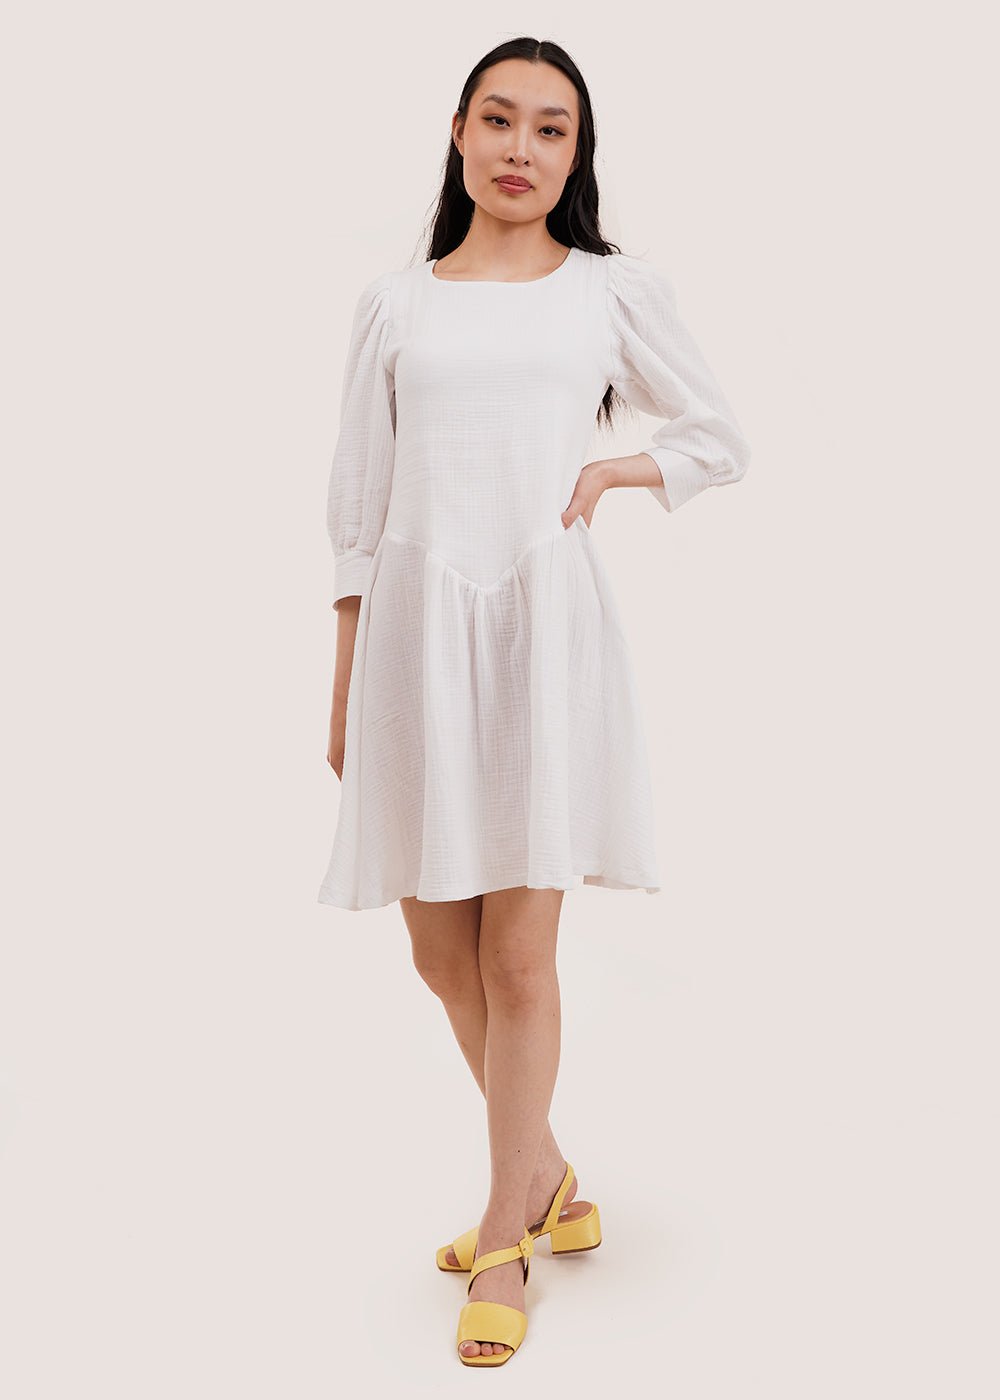 Tach Anker Dress - New Classics Studios Sustainable Ethical Fashion Canada